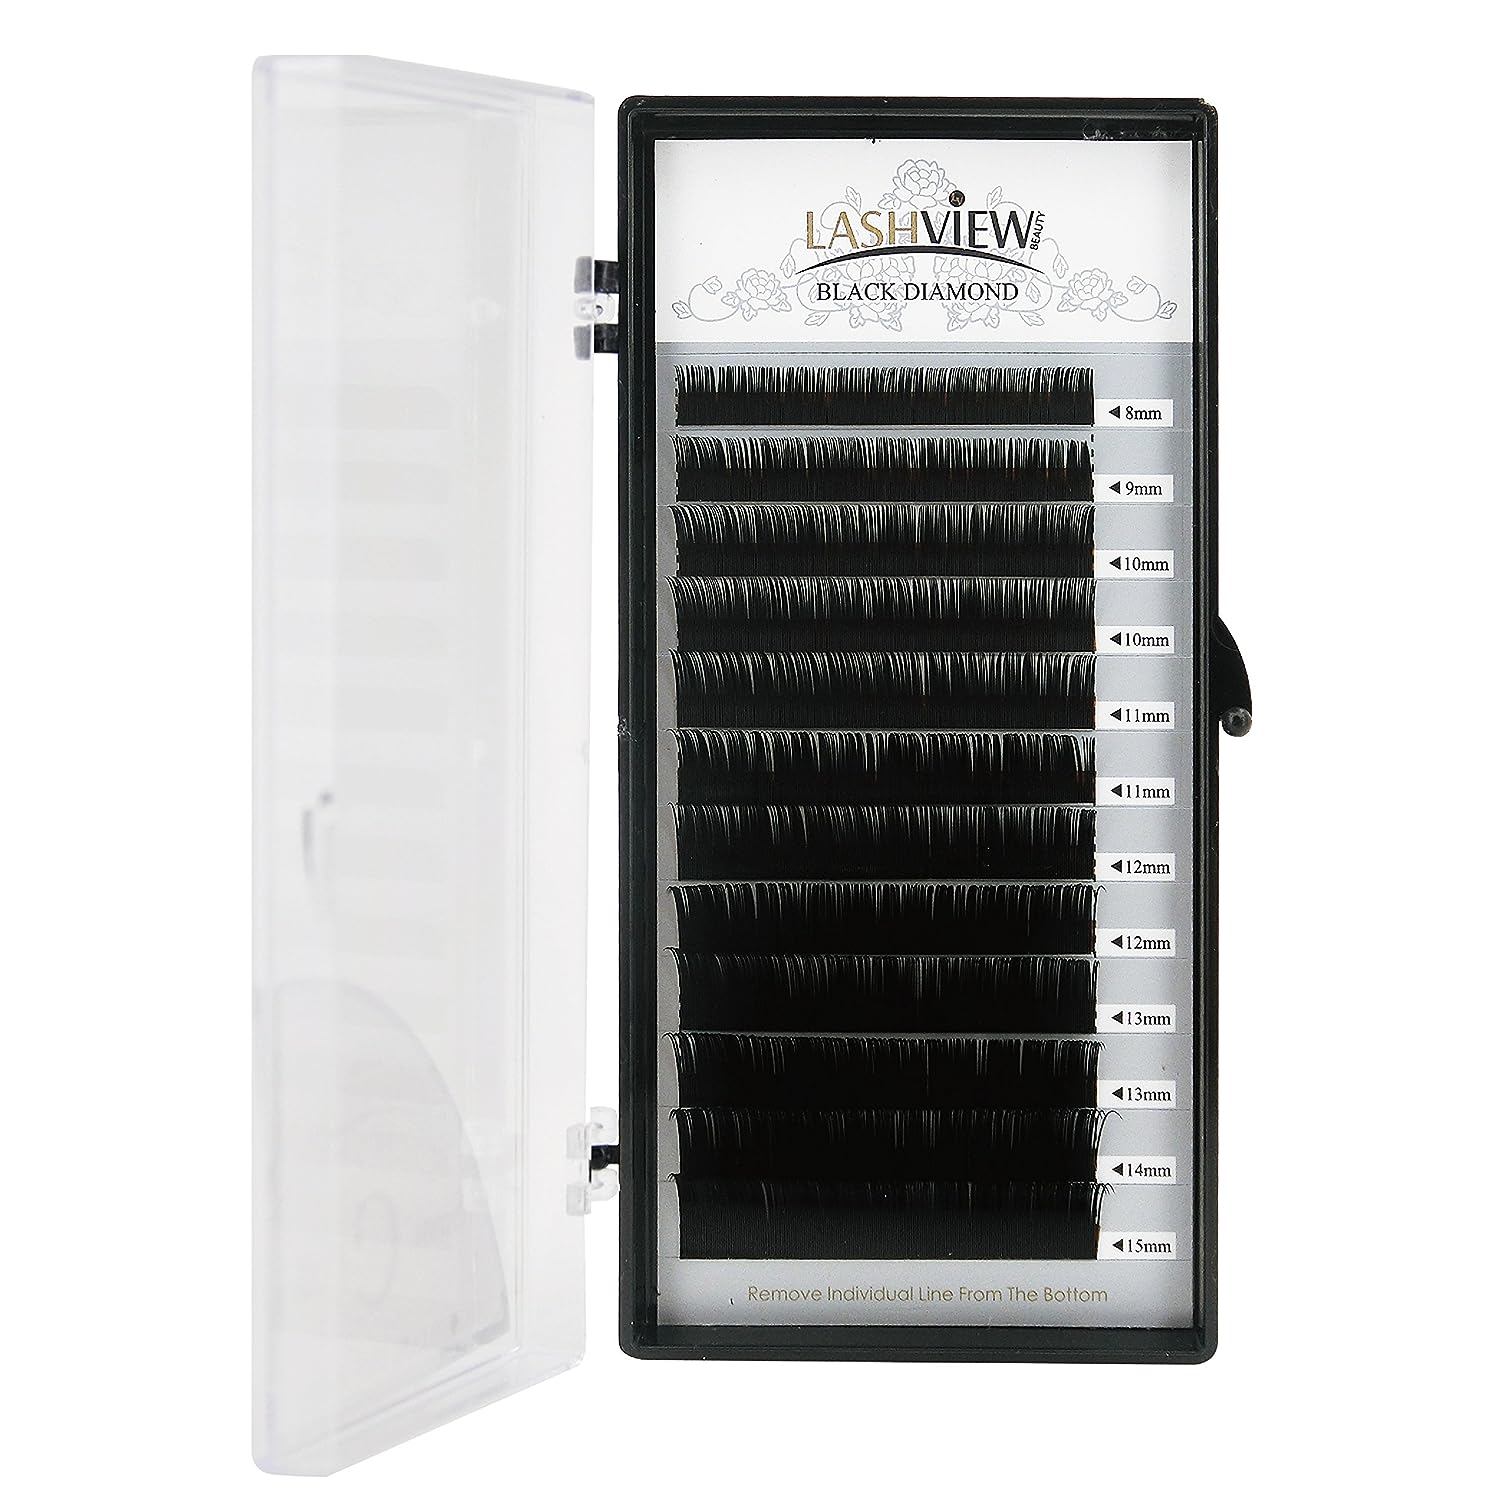 LASHVIEW SUPER MATTE Split Tips Eyelash Extension Mink Black Individual Ellipse Flat lashes Thickness 0.20mm C Curl 8-15mm Mix Tray Semi-permanent Application-friendly Extremely Soft Lashes For Salon